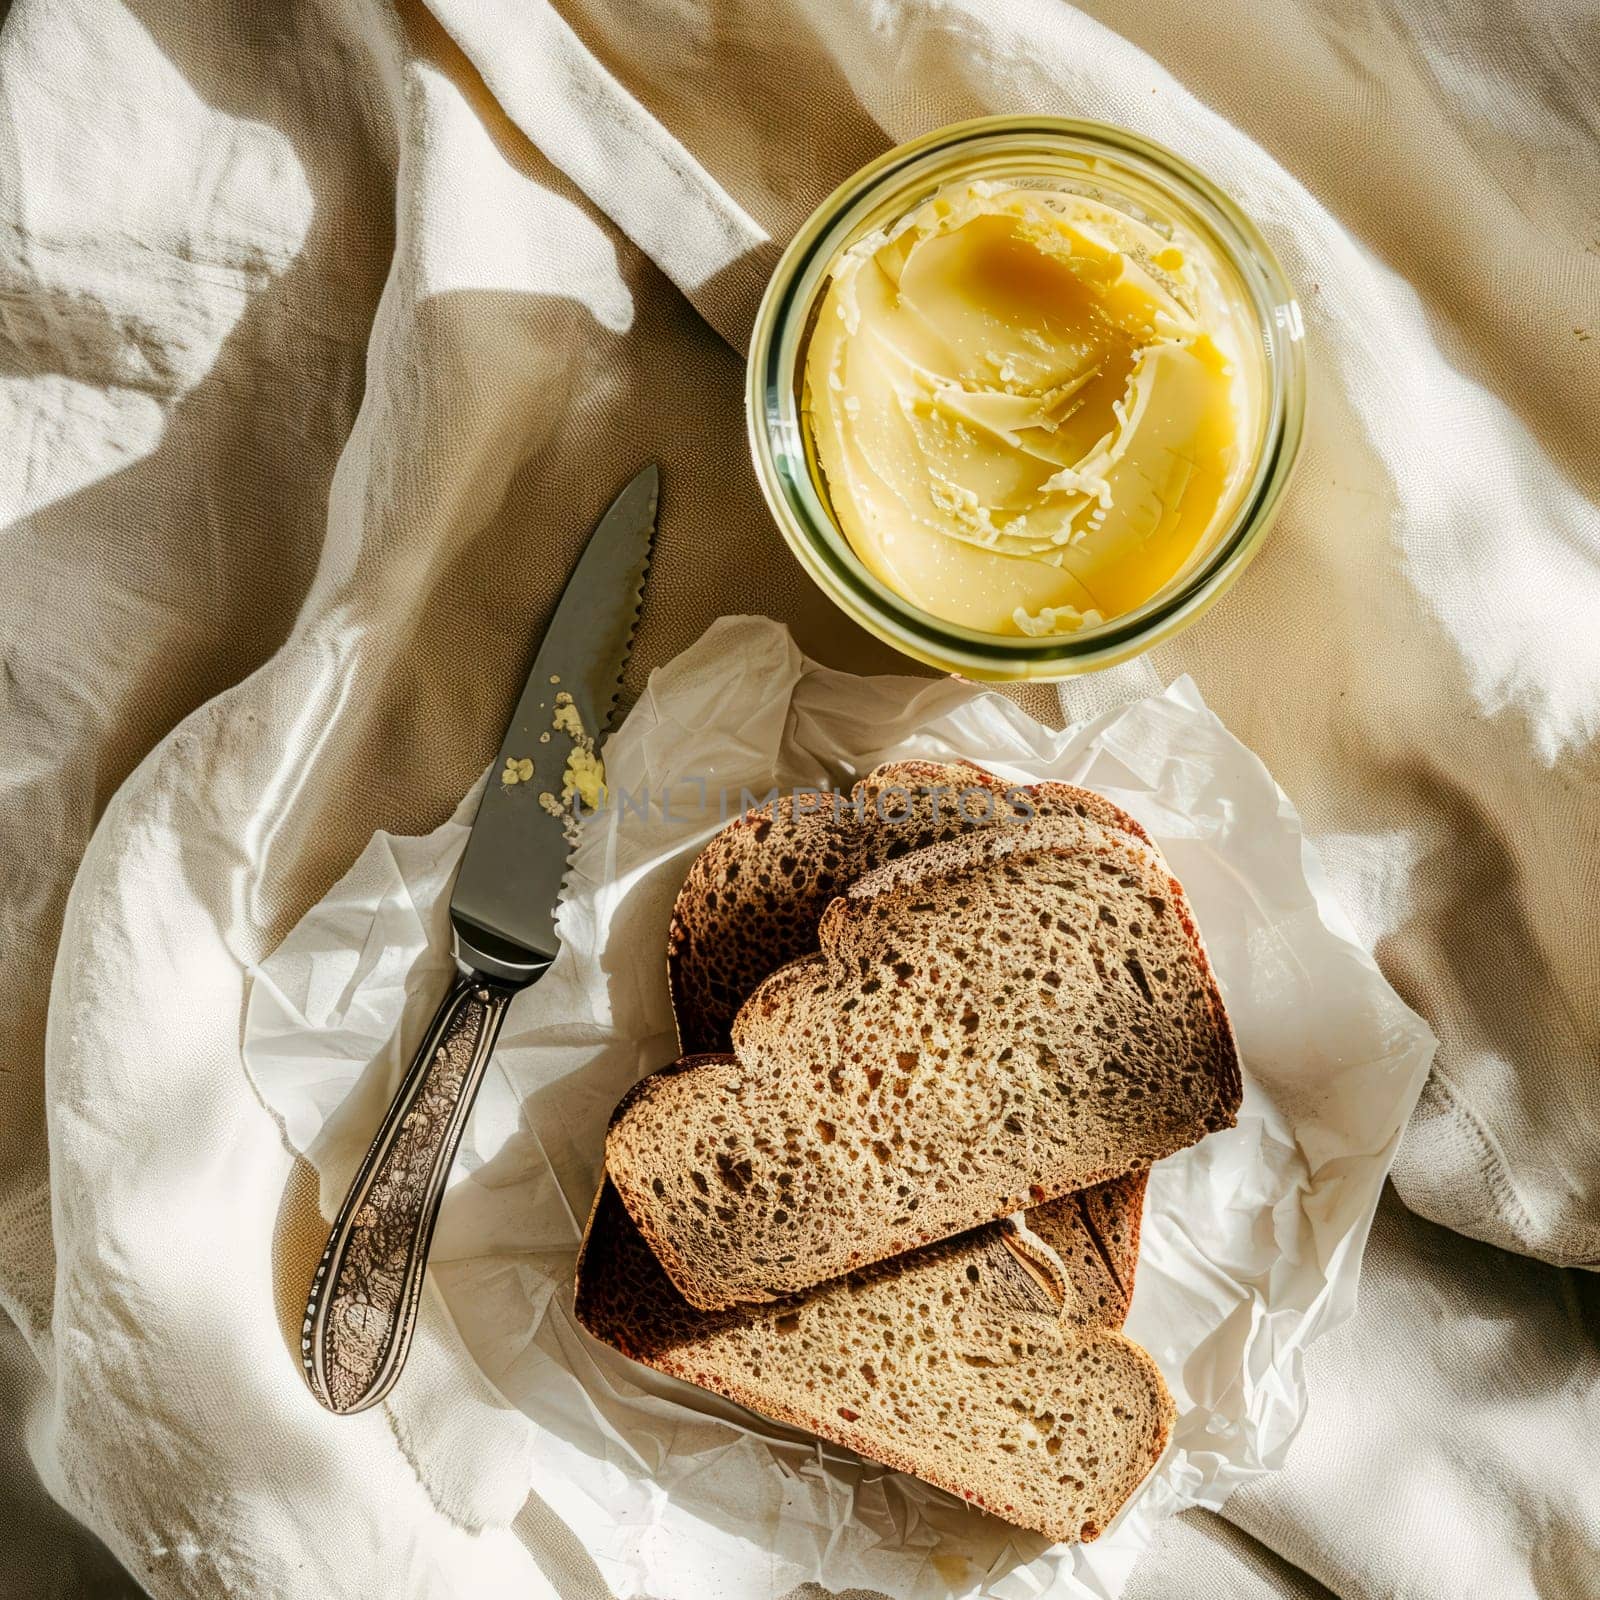 Top view of a jar of ghee and two slices of healthy whole grain bread on a light background. Healthy diet.